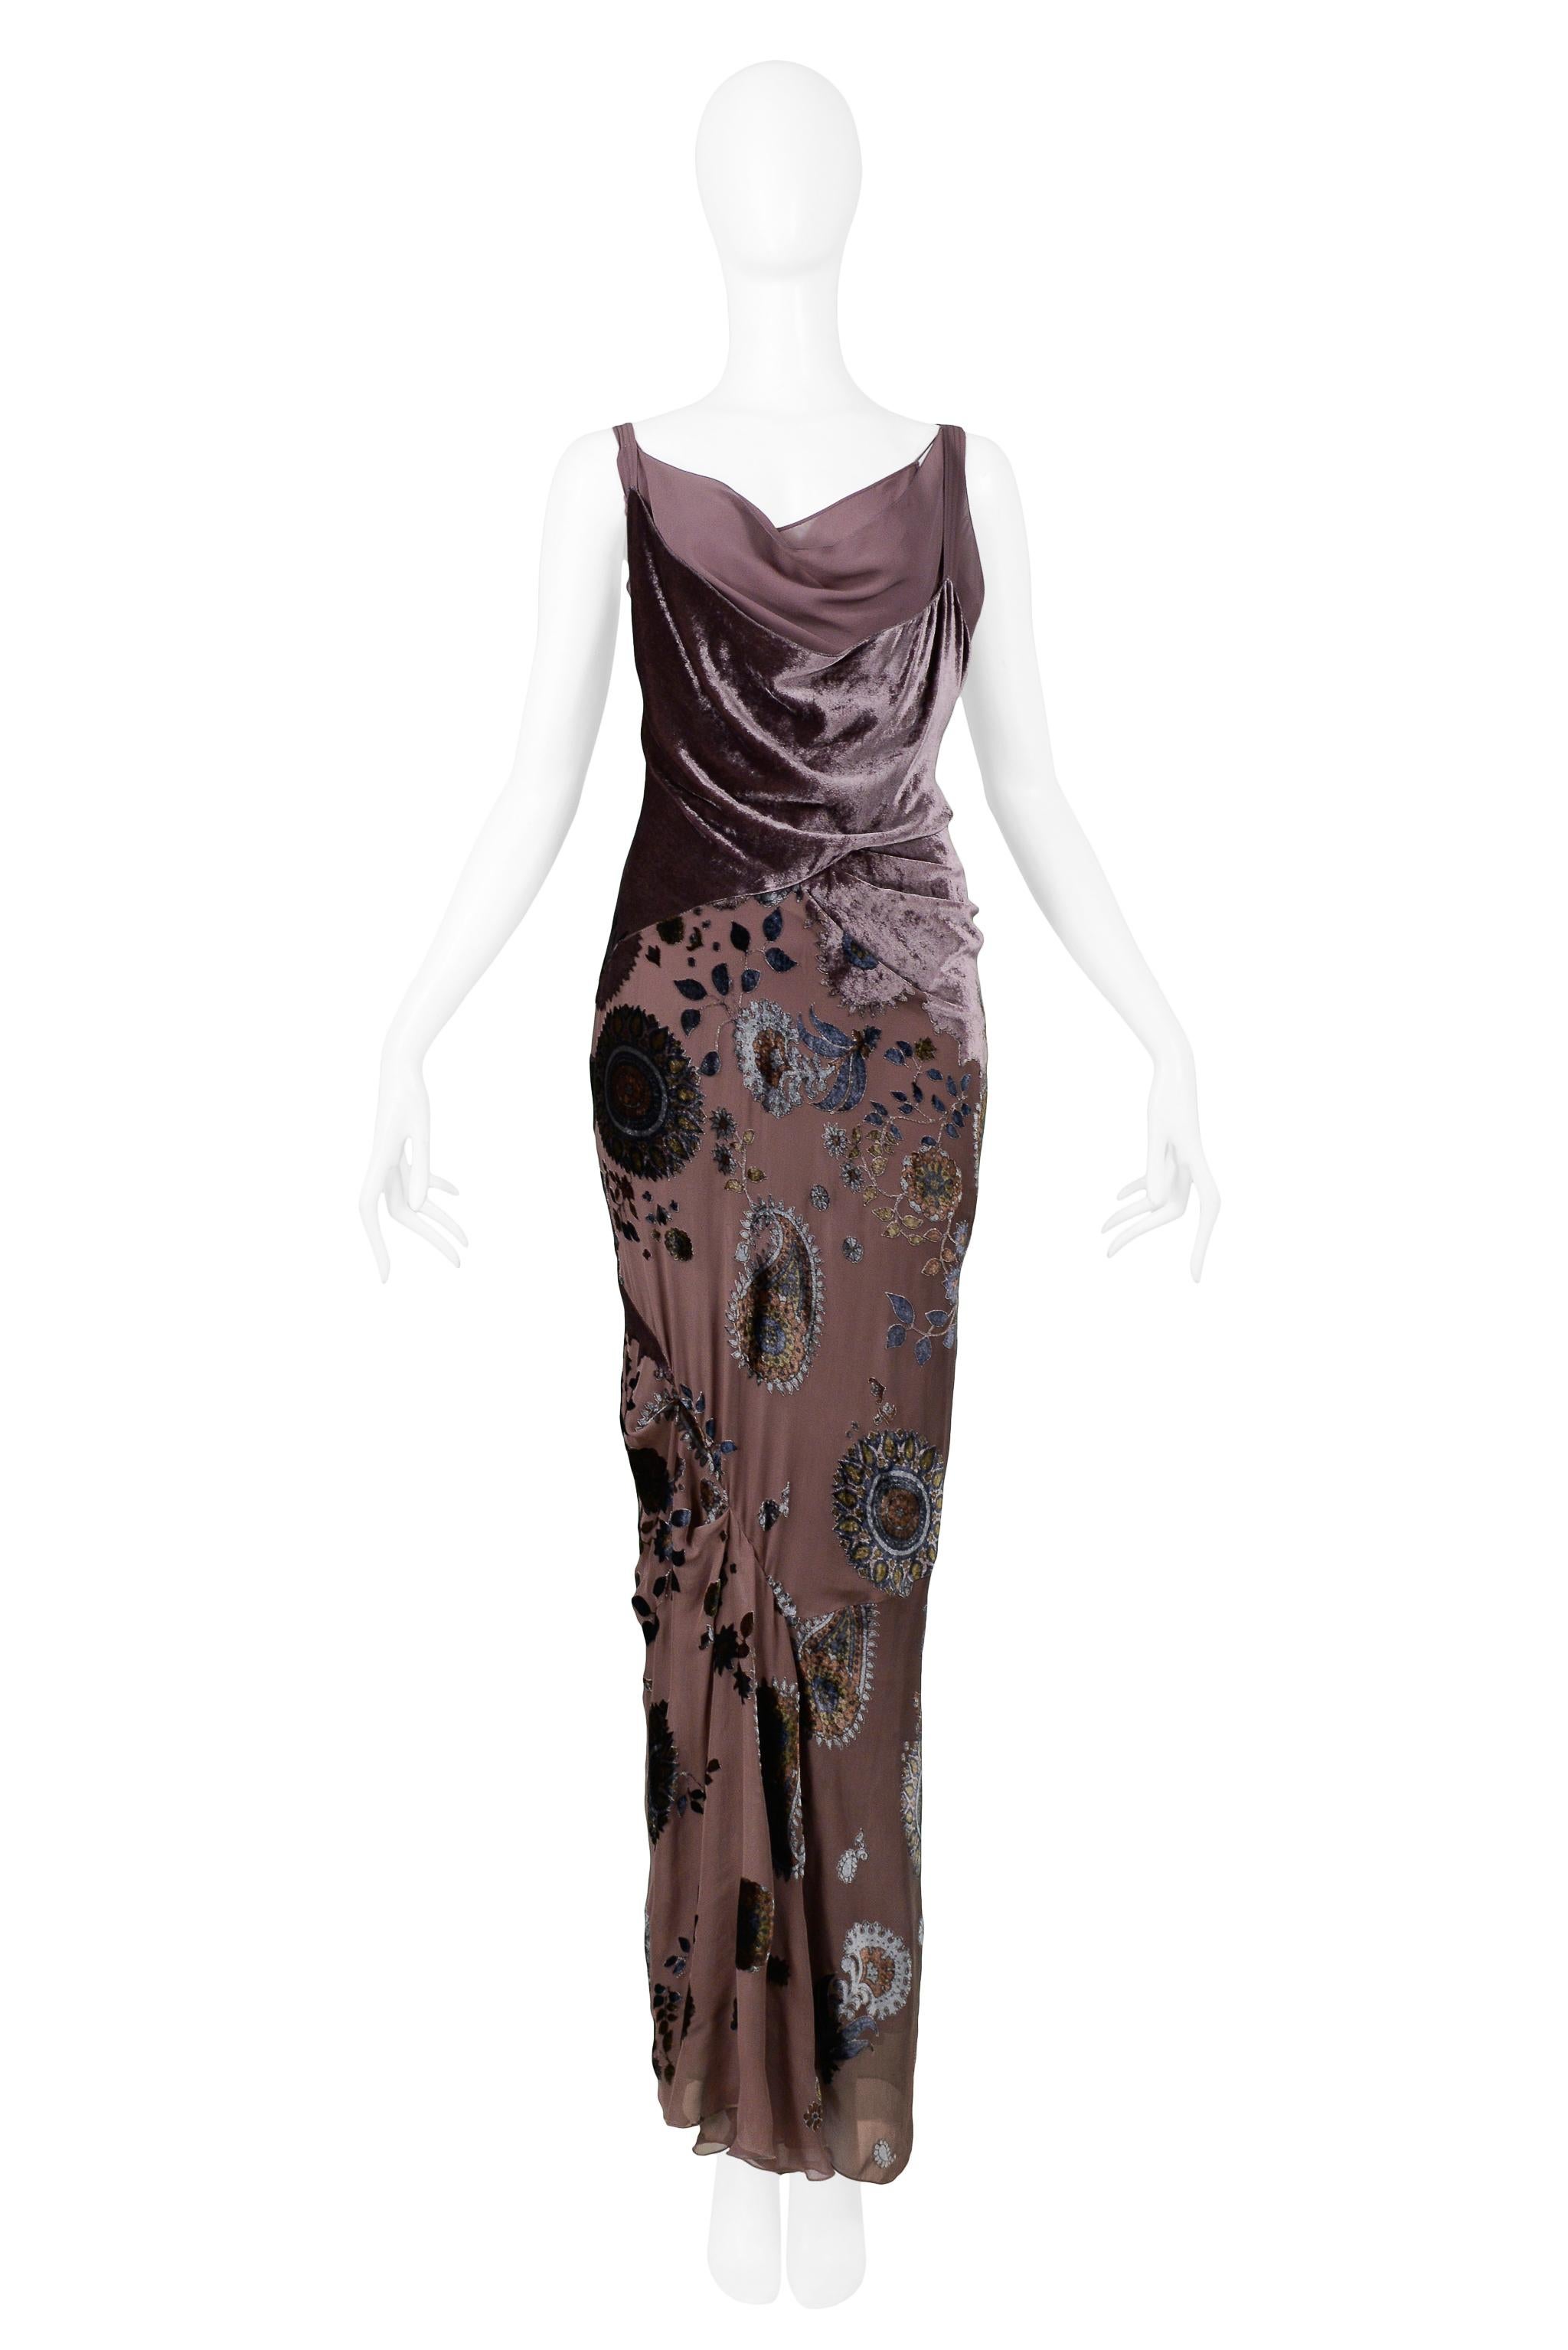 Resurrection is excited to offer this vintage Christian Dior by John Galliano taupe velvet gown featuring a velvet and chiffon asymmetrical bodice, a multicolor floral burnout skirt with a gathered panel, and tucks at the waistband. 

Christian Dior